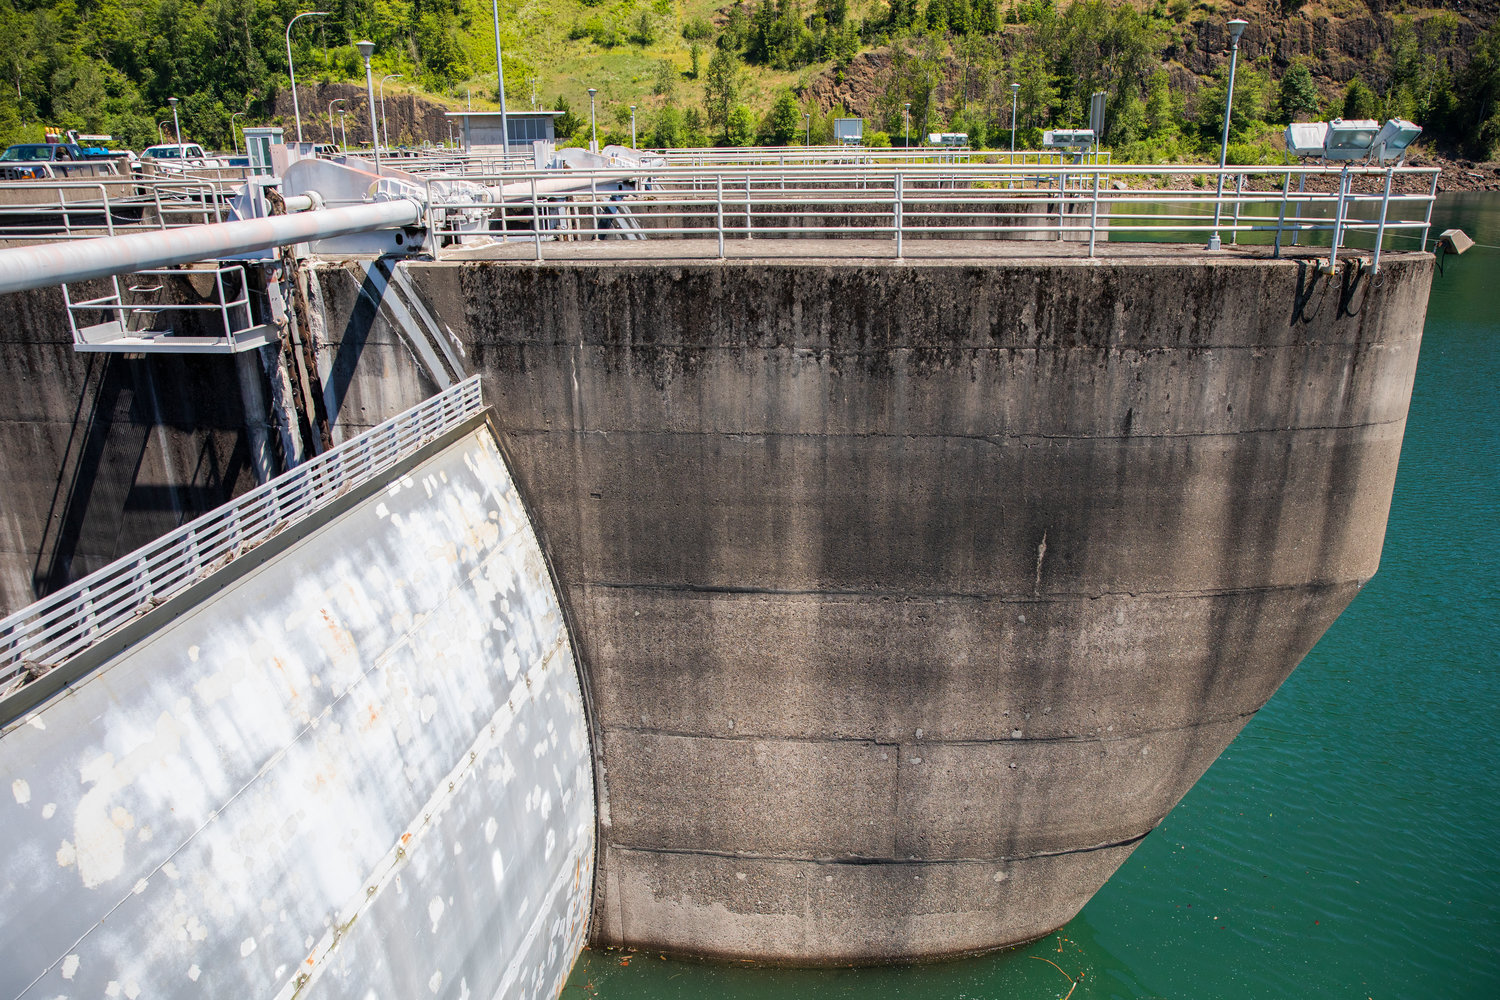 The Mossyrock Dam is pictured.